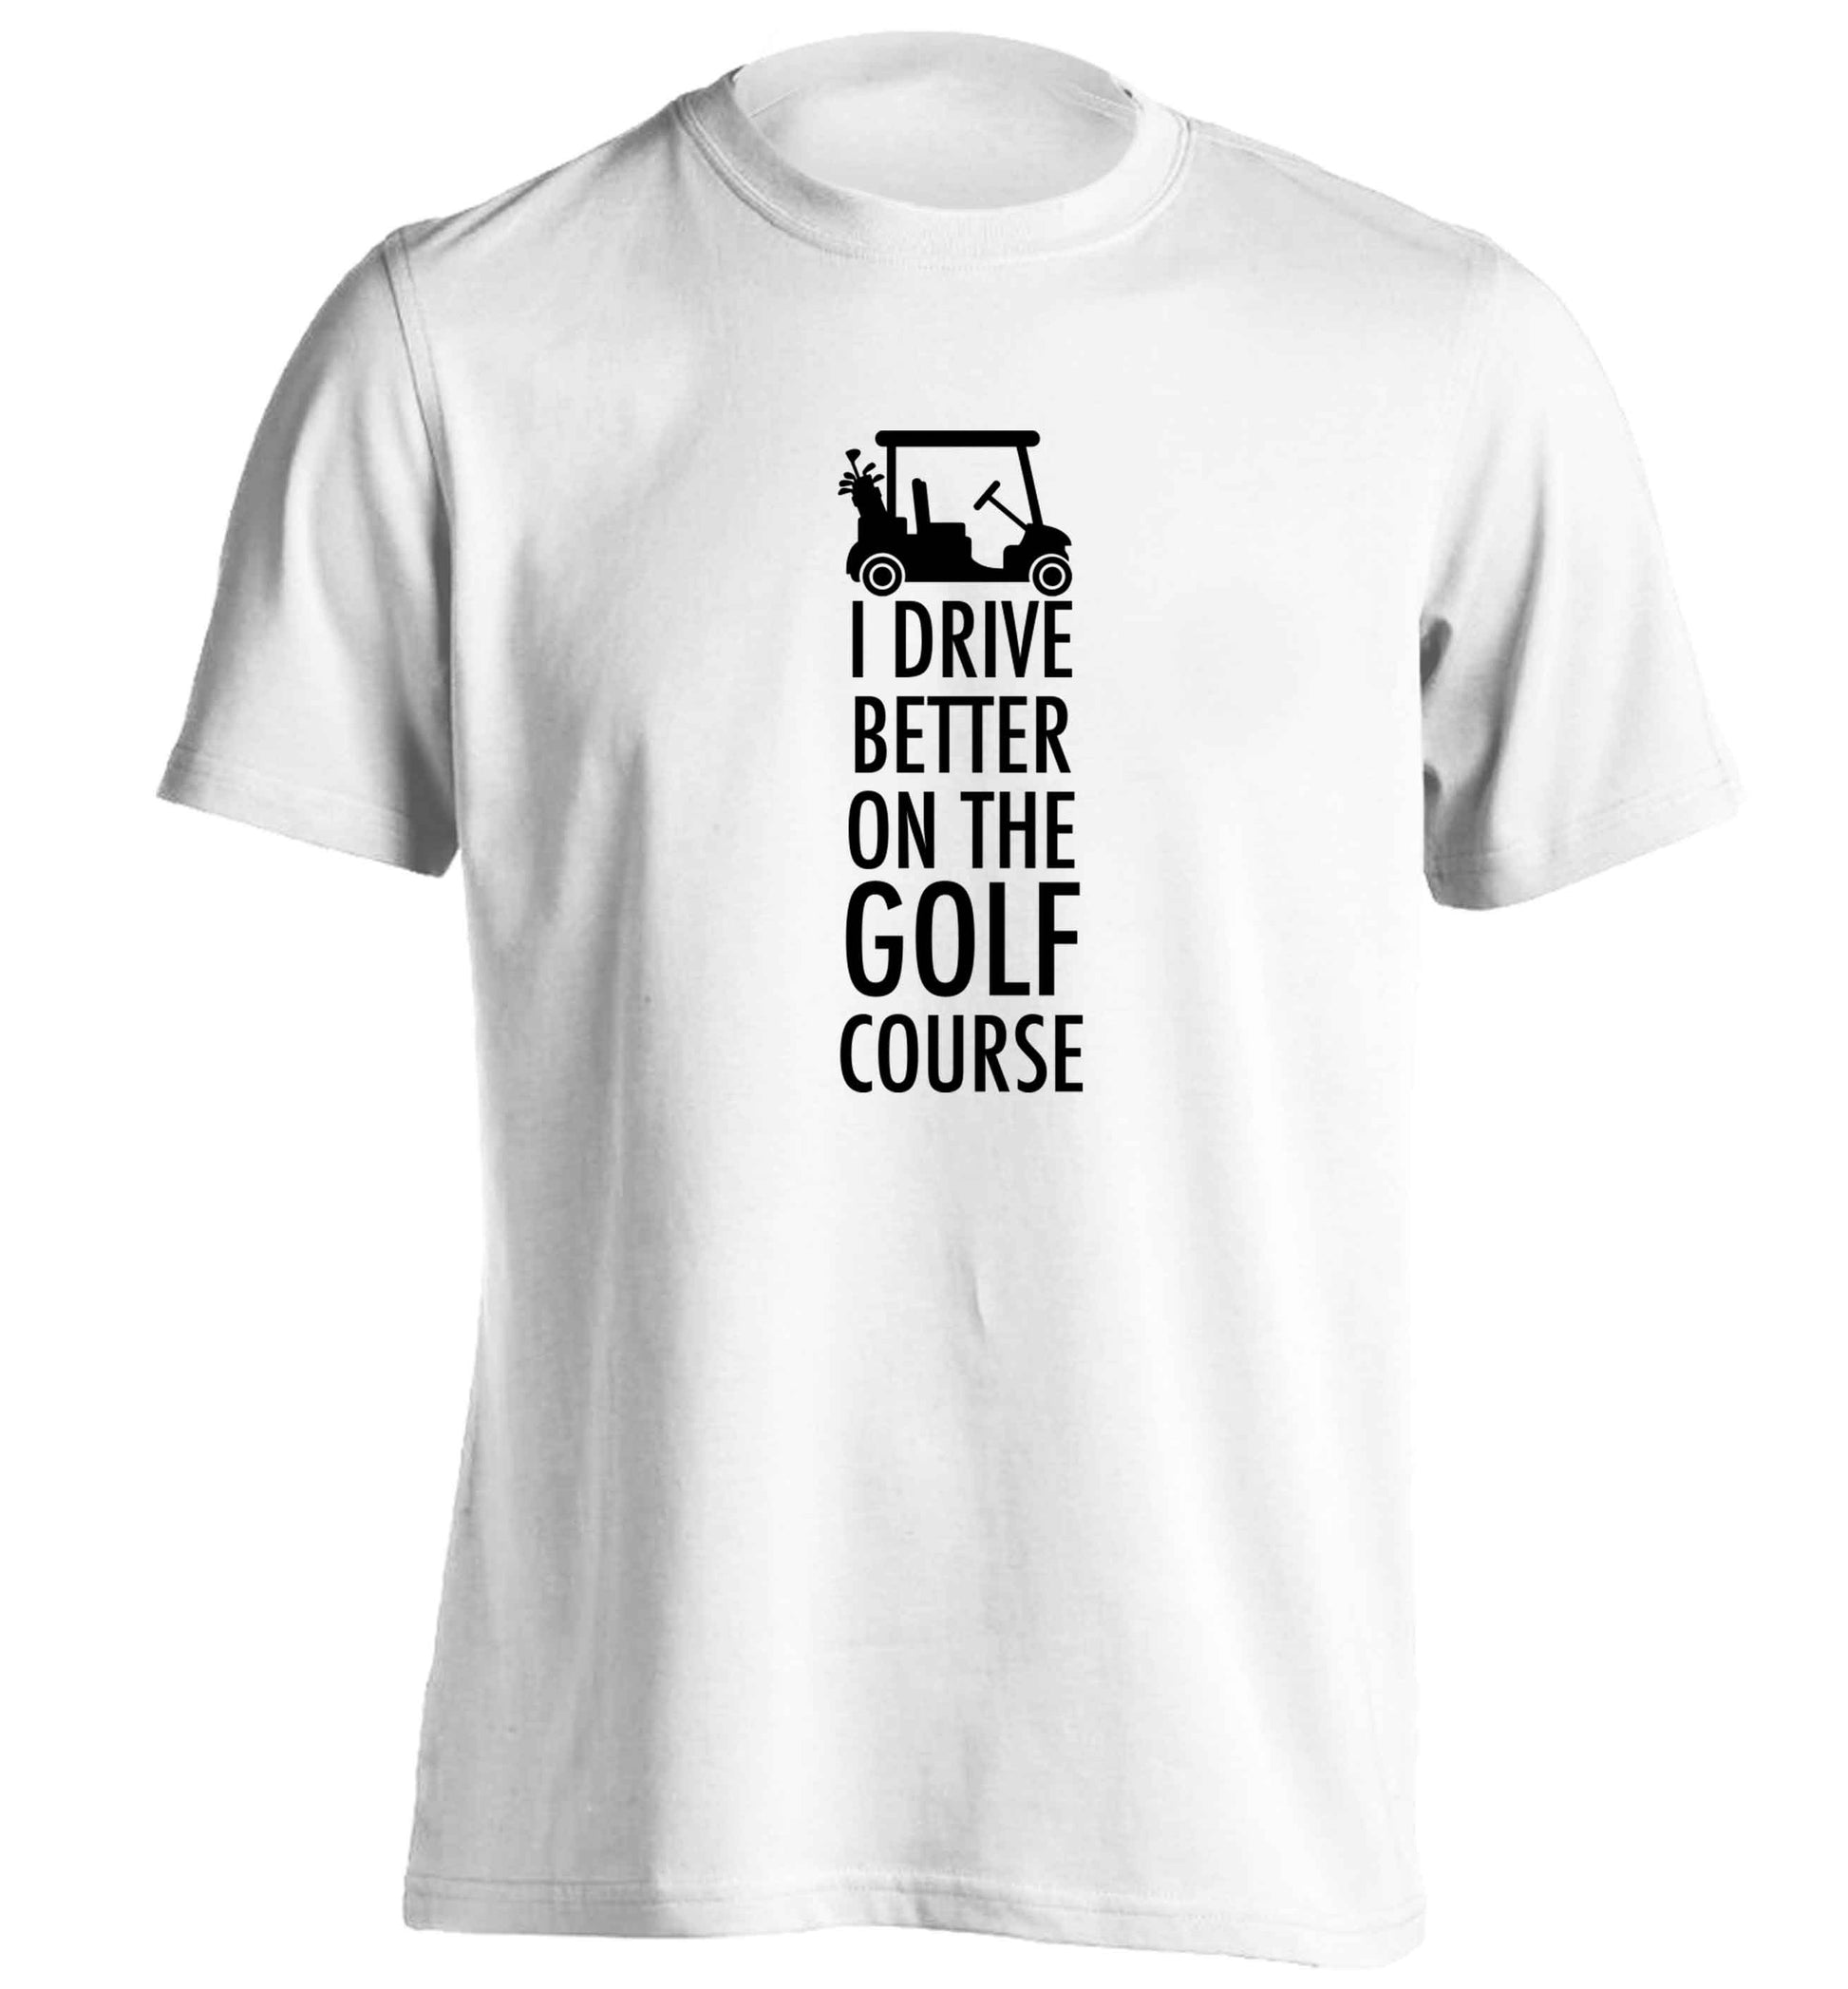 I drive better on the golf course adults unisex white Tshirt 2XL